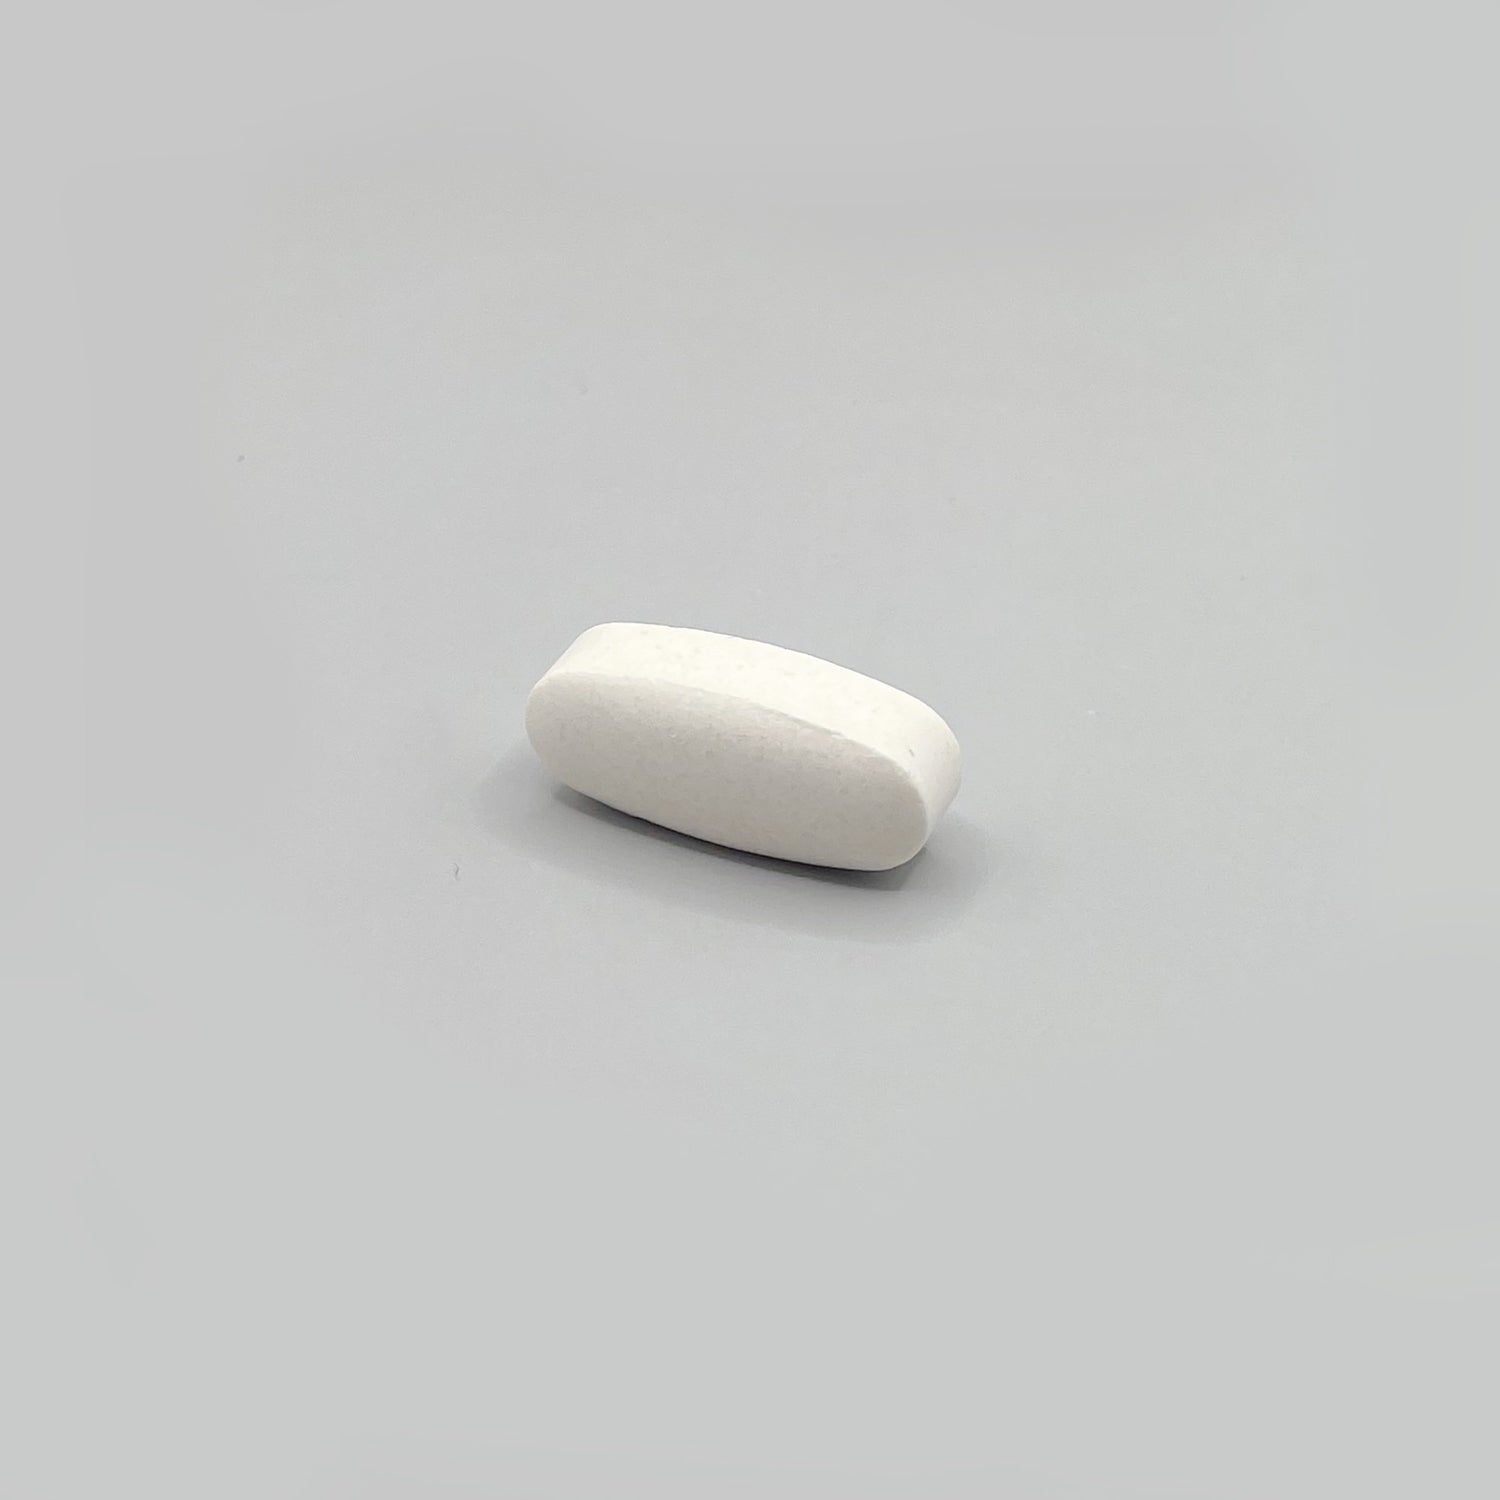 Oval white pill